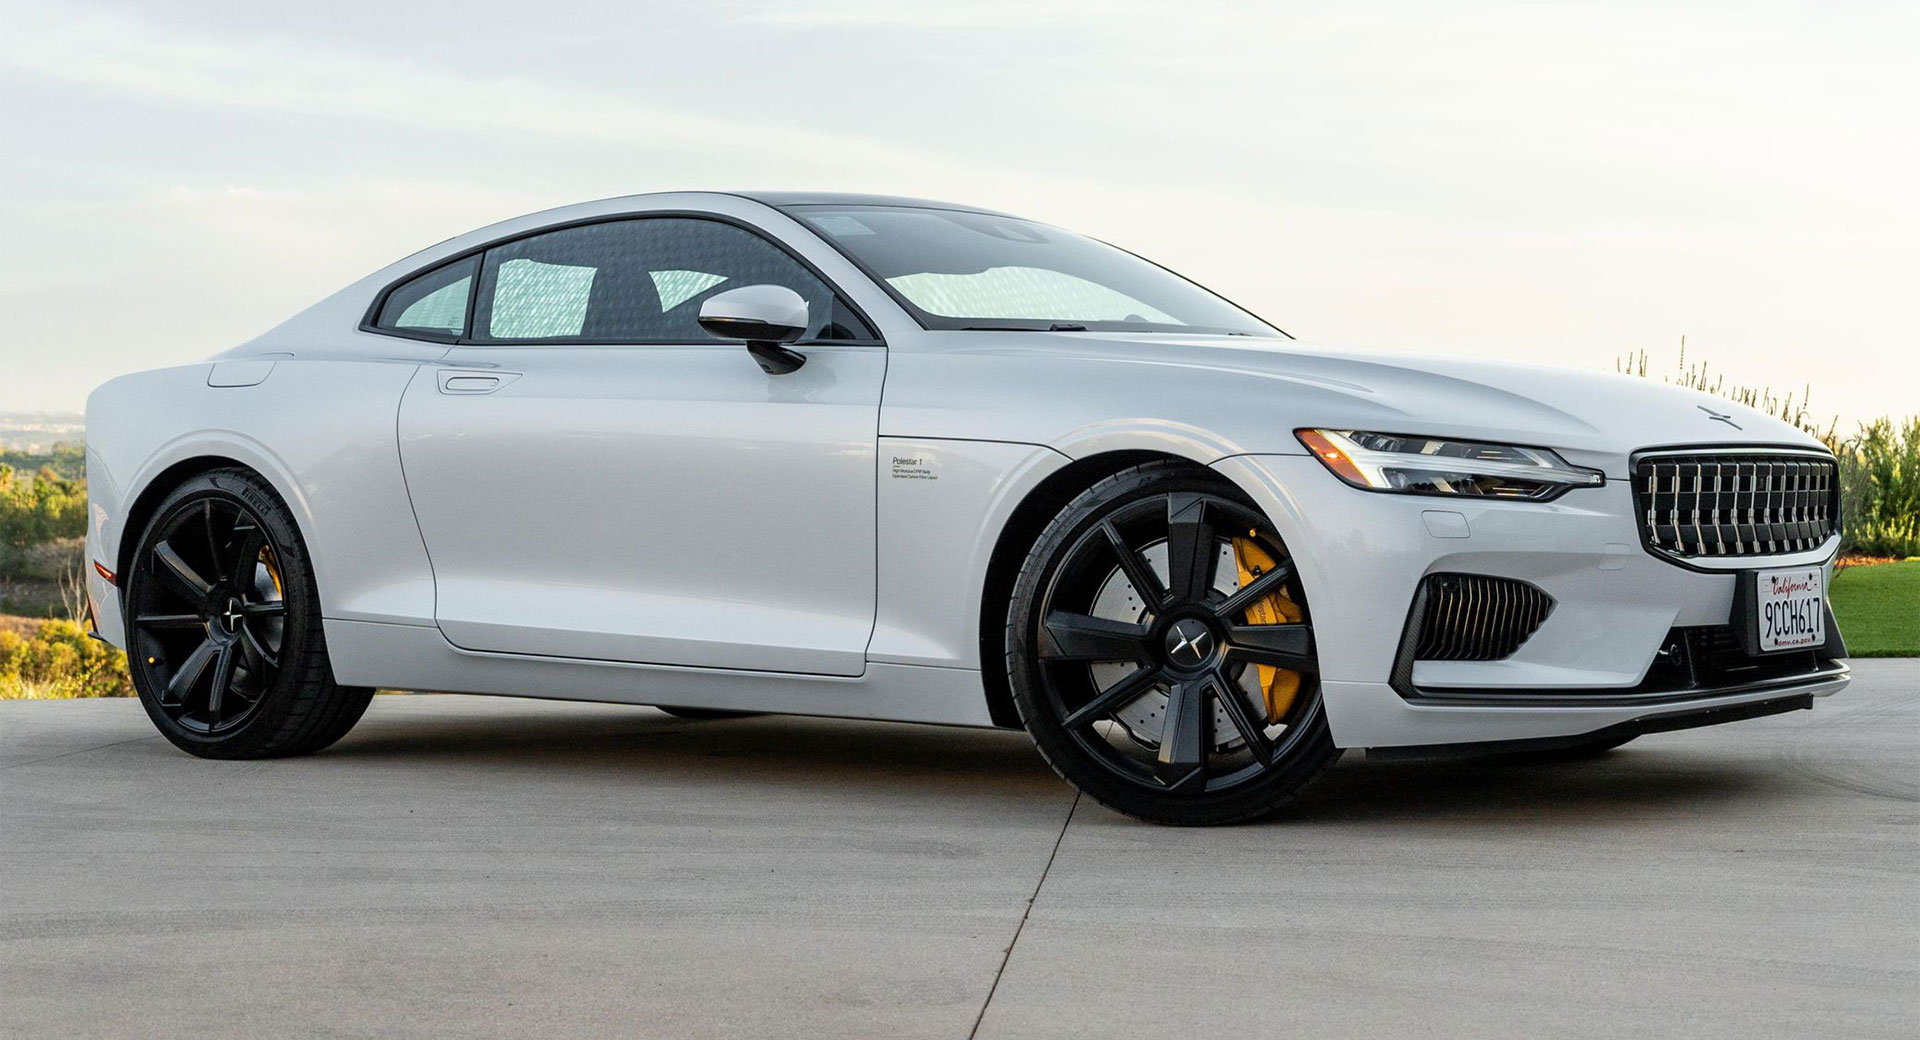 Fancy Owning The 619 HP Polestar 1 Of Automaker's CEO? | Carscoops